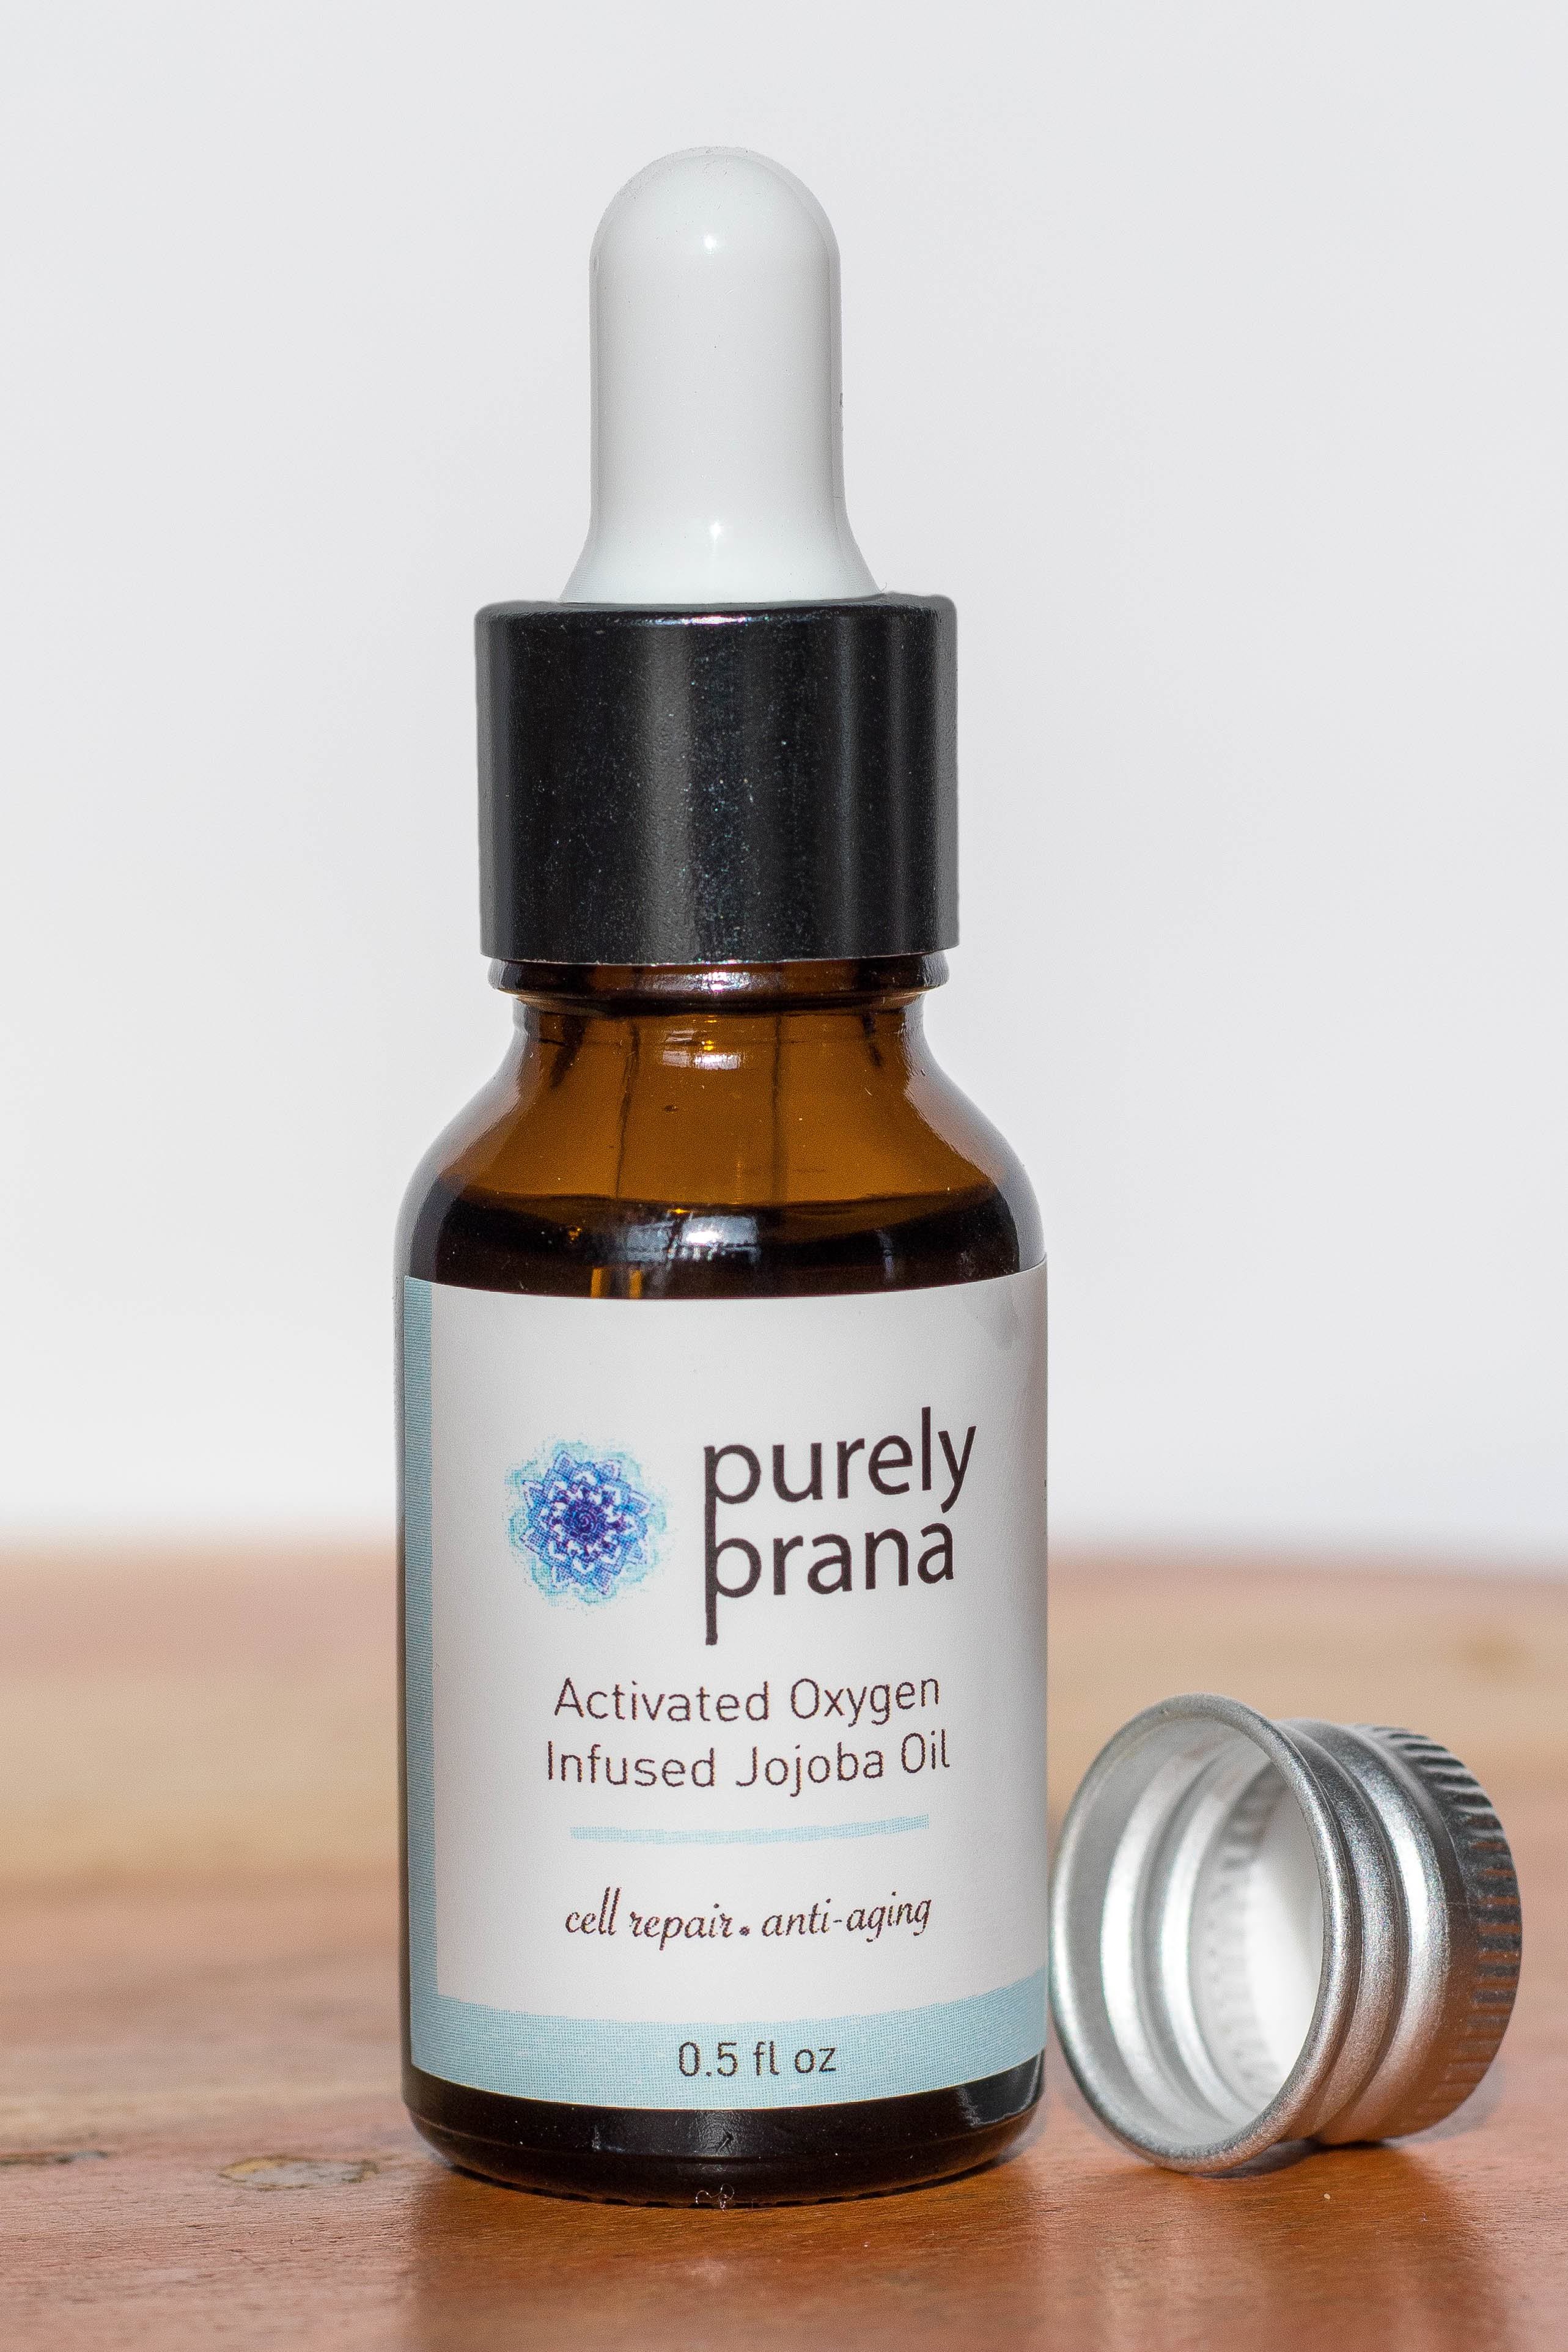 Activated Oxygen infused Jojoba Oil, purely prana oil, jojoba oil, organic oil, organic skincare